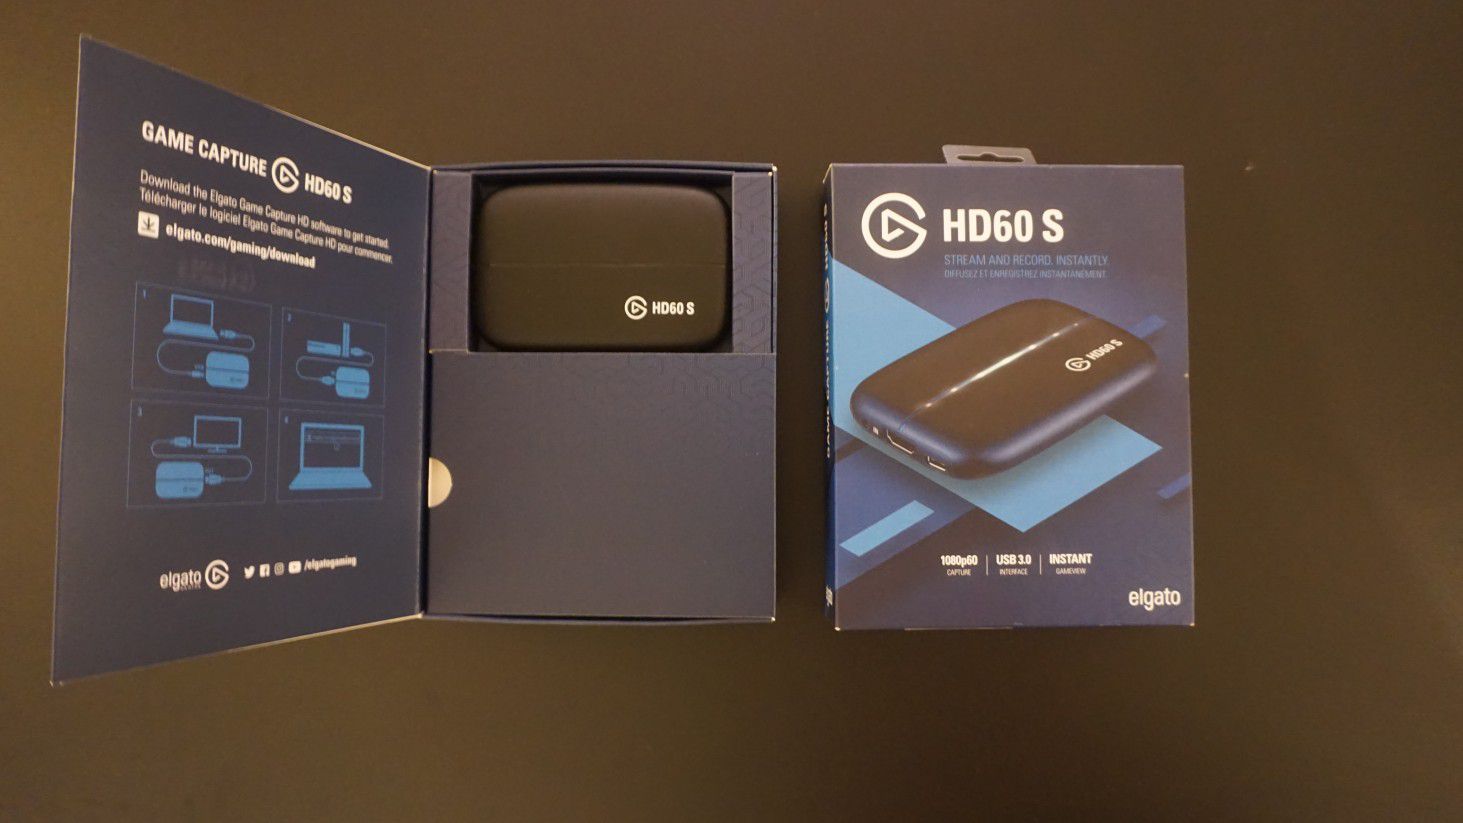 Elgato HD S External Capture Card for Sale in Irvine, CA   OfferUp